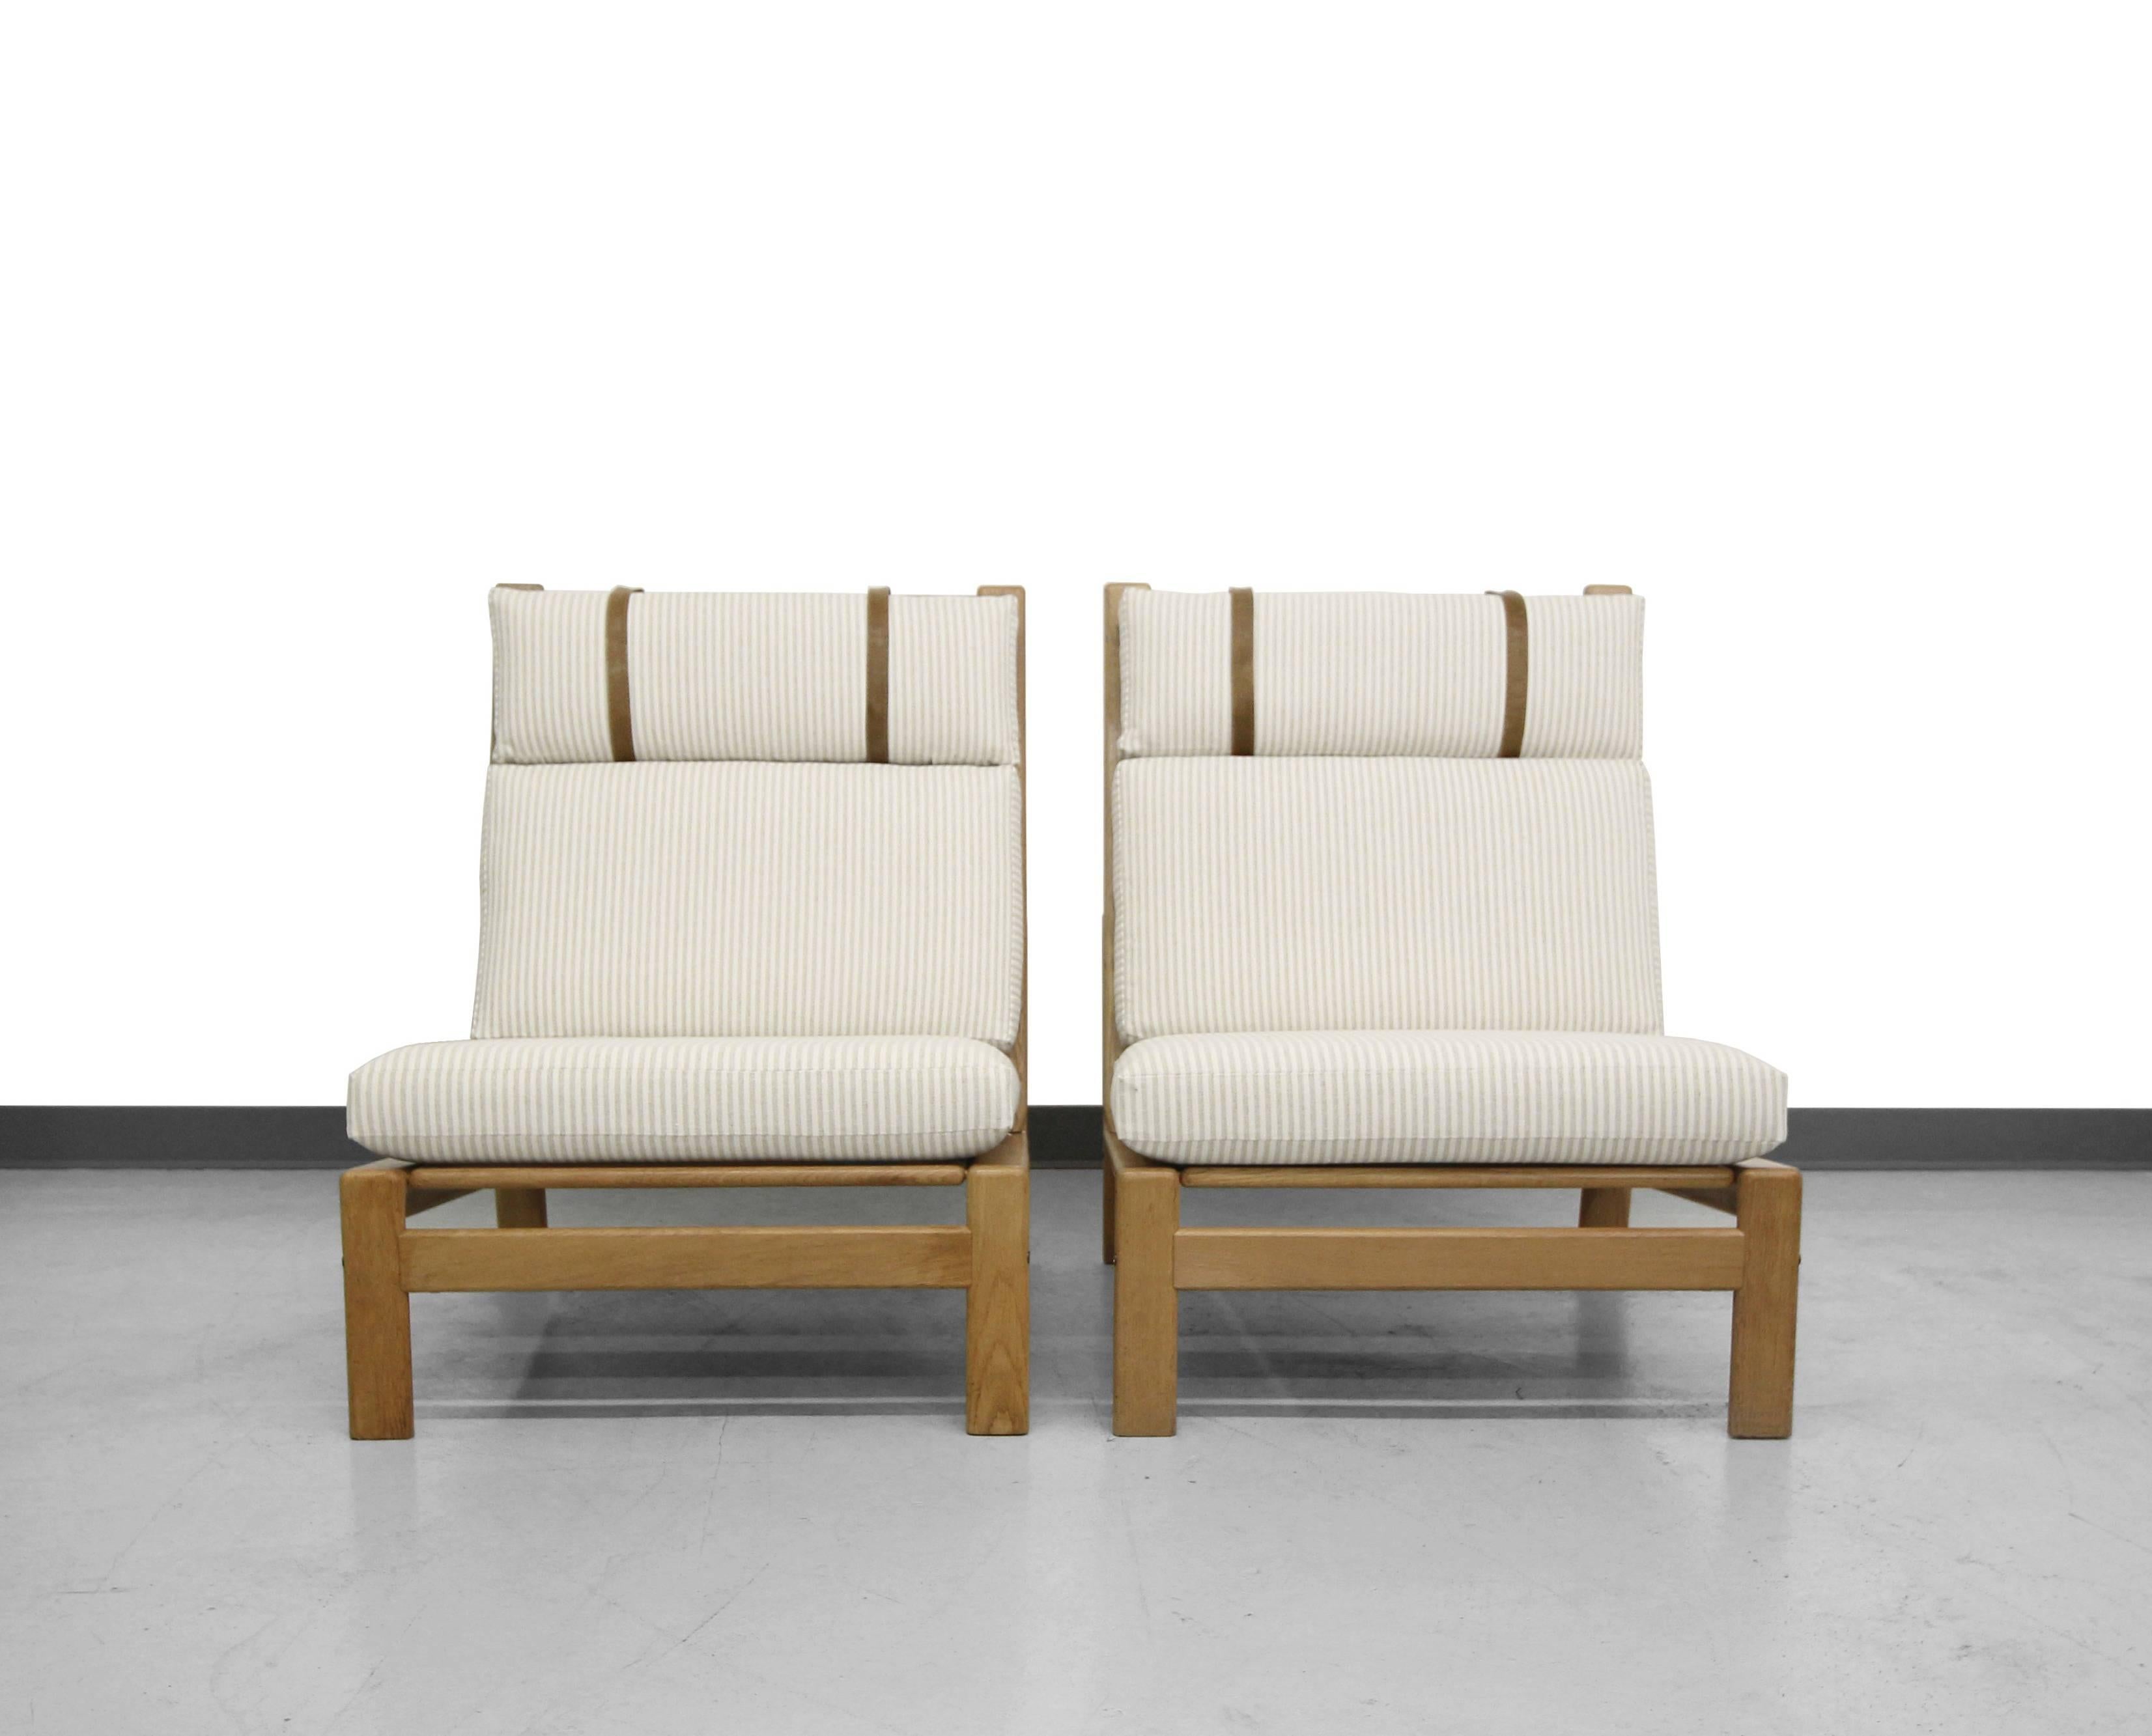 Rare solid oak framed Danish high back lounge chairs by Komfort design. Chairs are upholstered in a high quality seer sucker fabric with original leather straps.